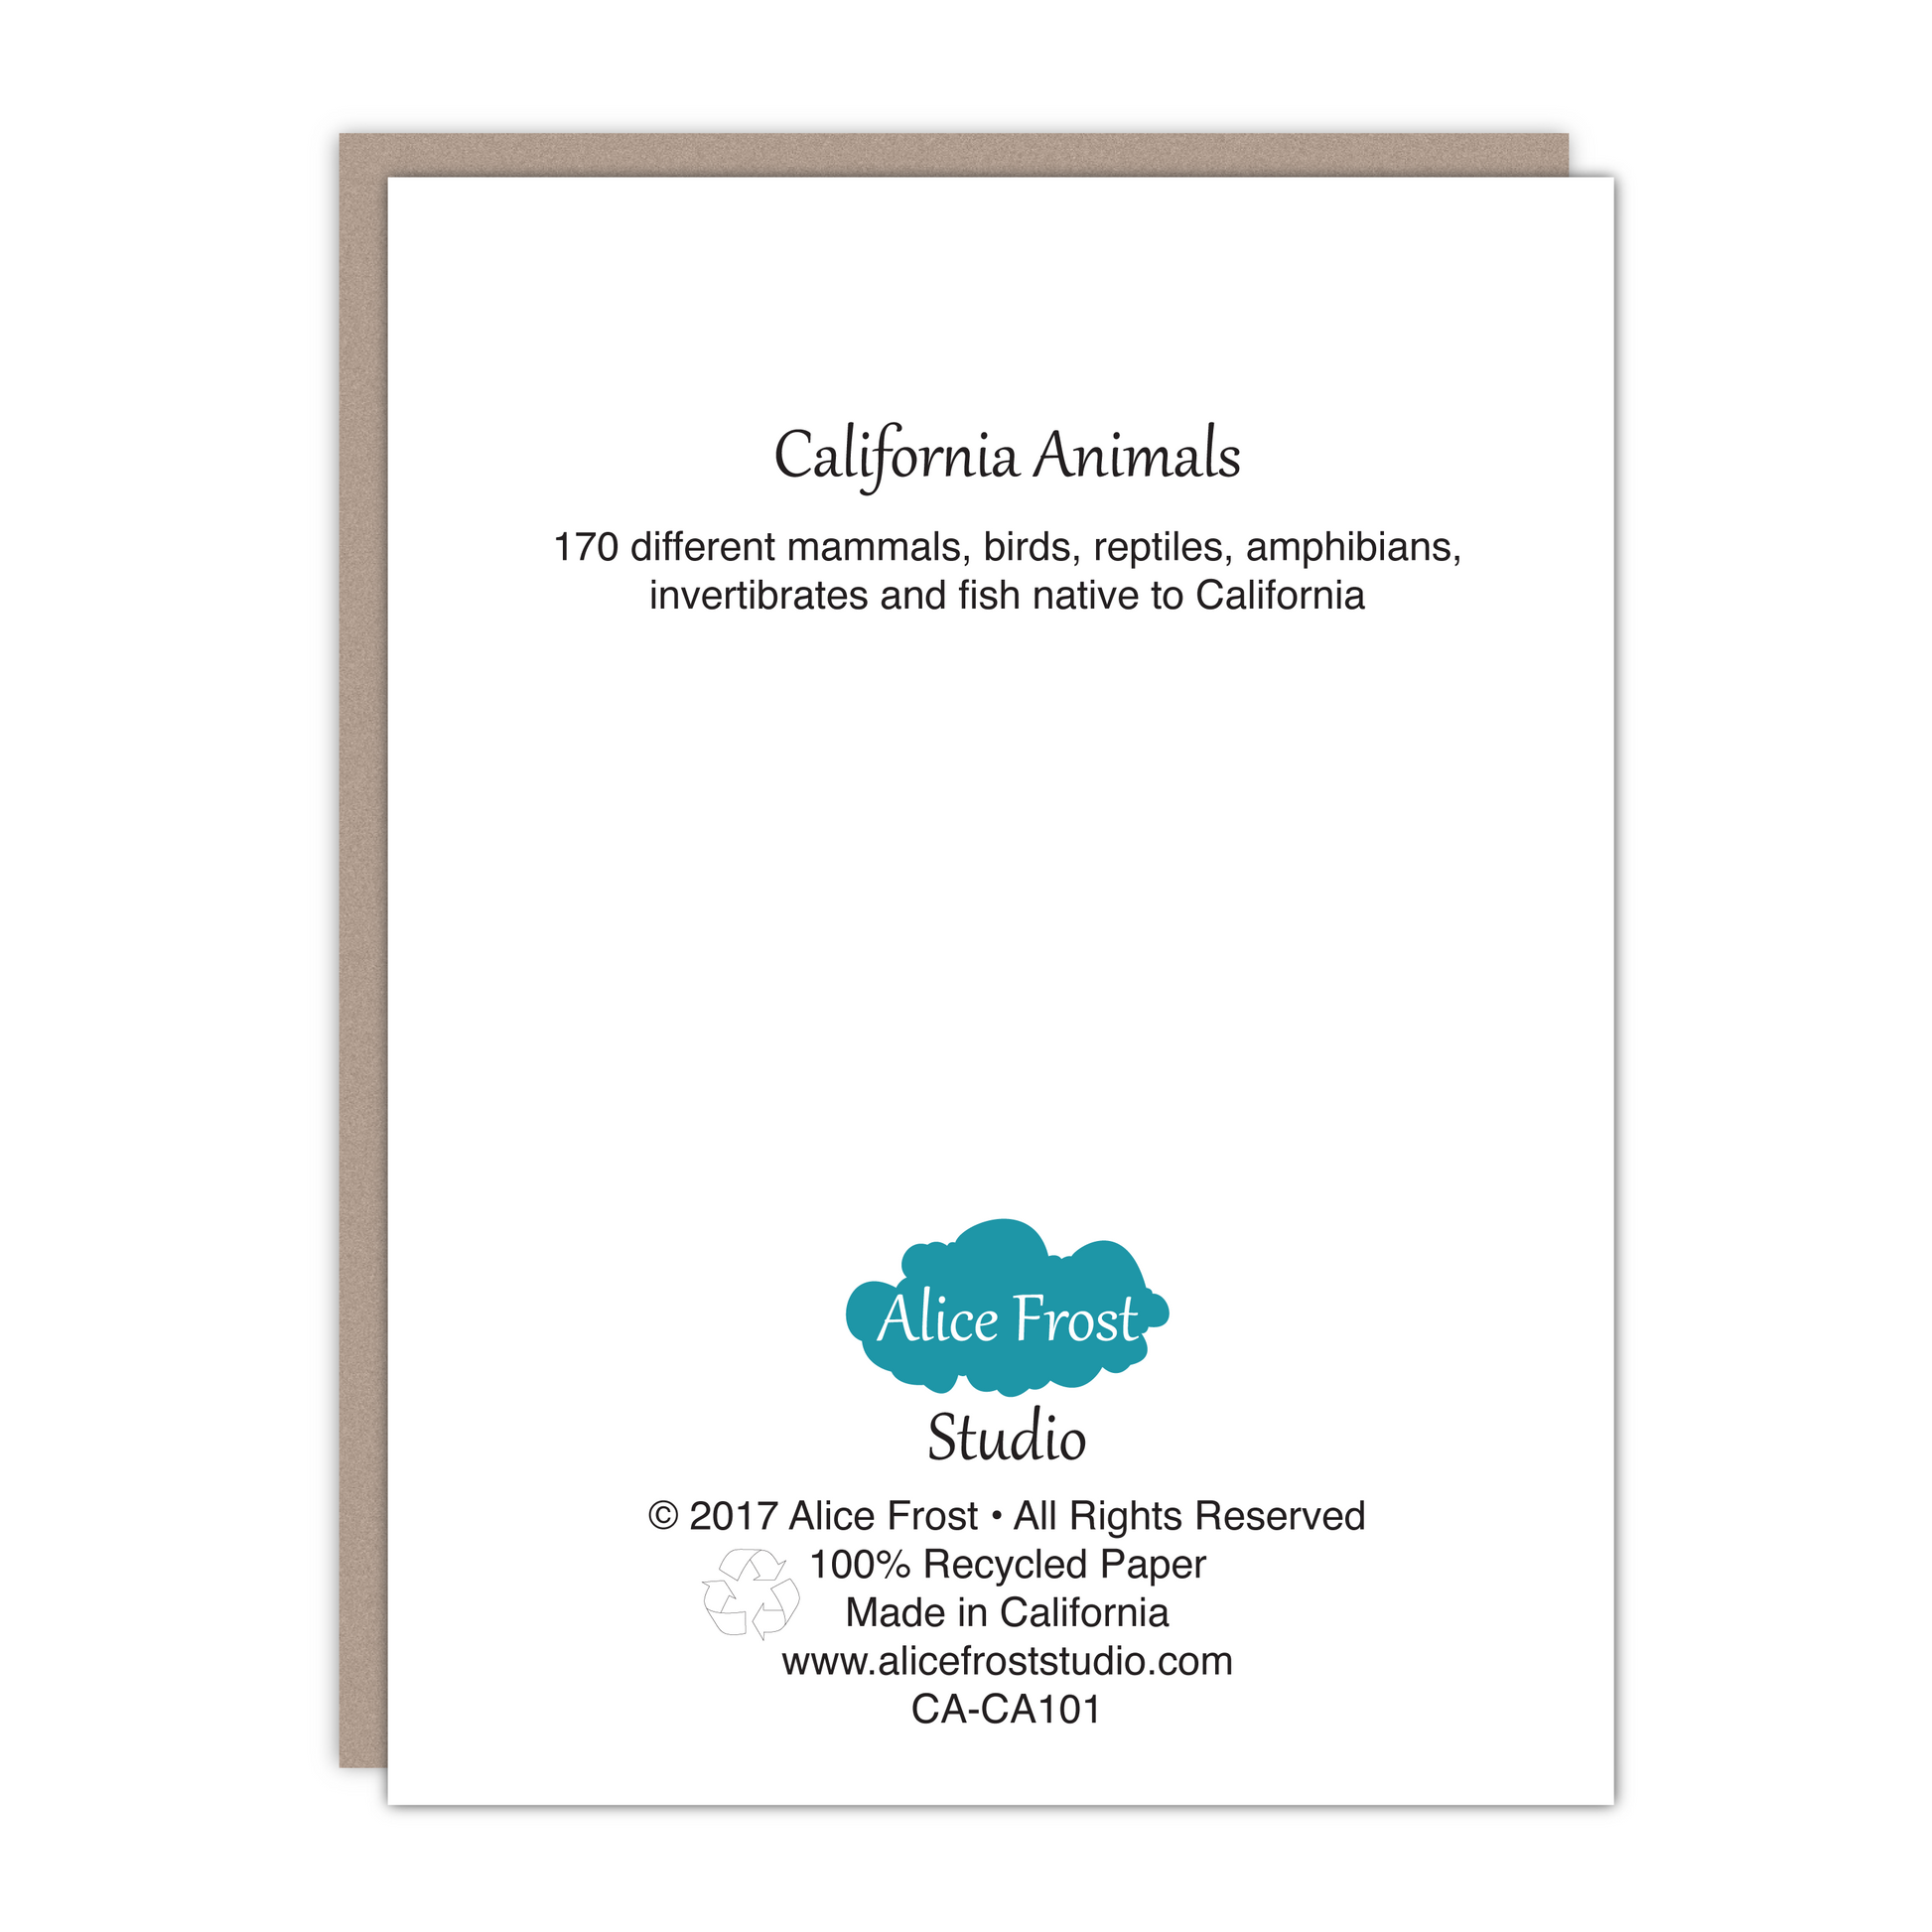 New size! California Animals Recycled Art Card - Alice Frost Studio